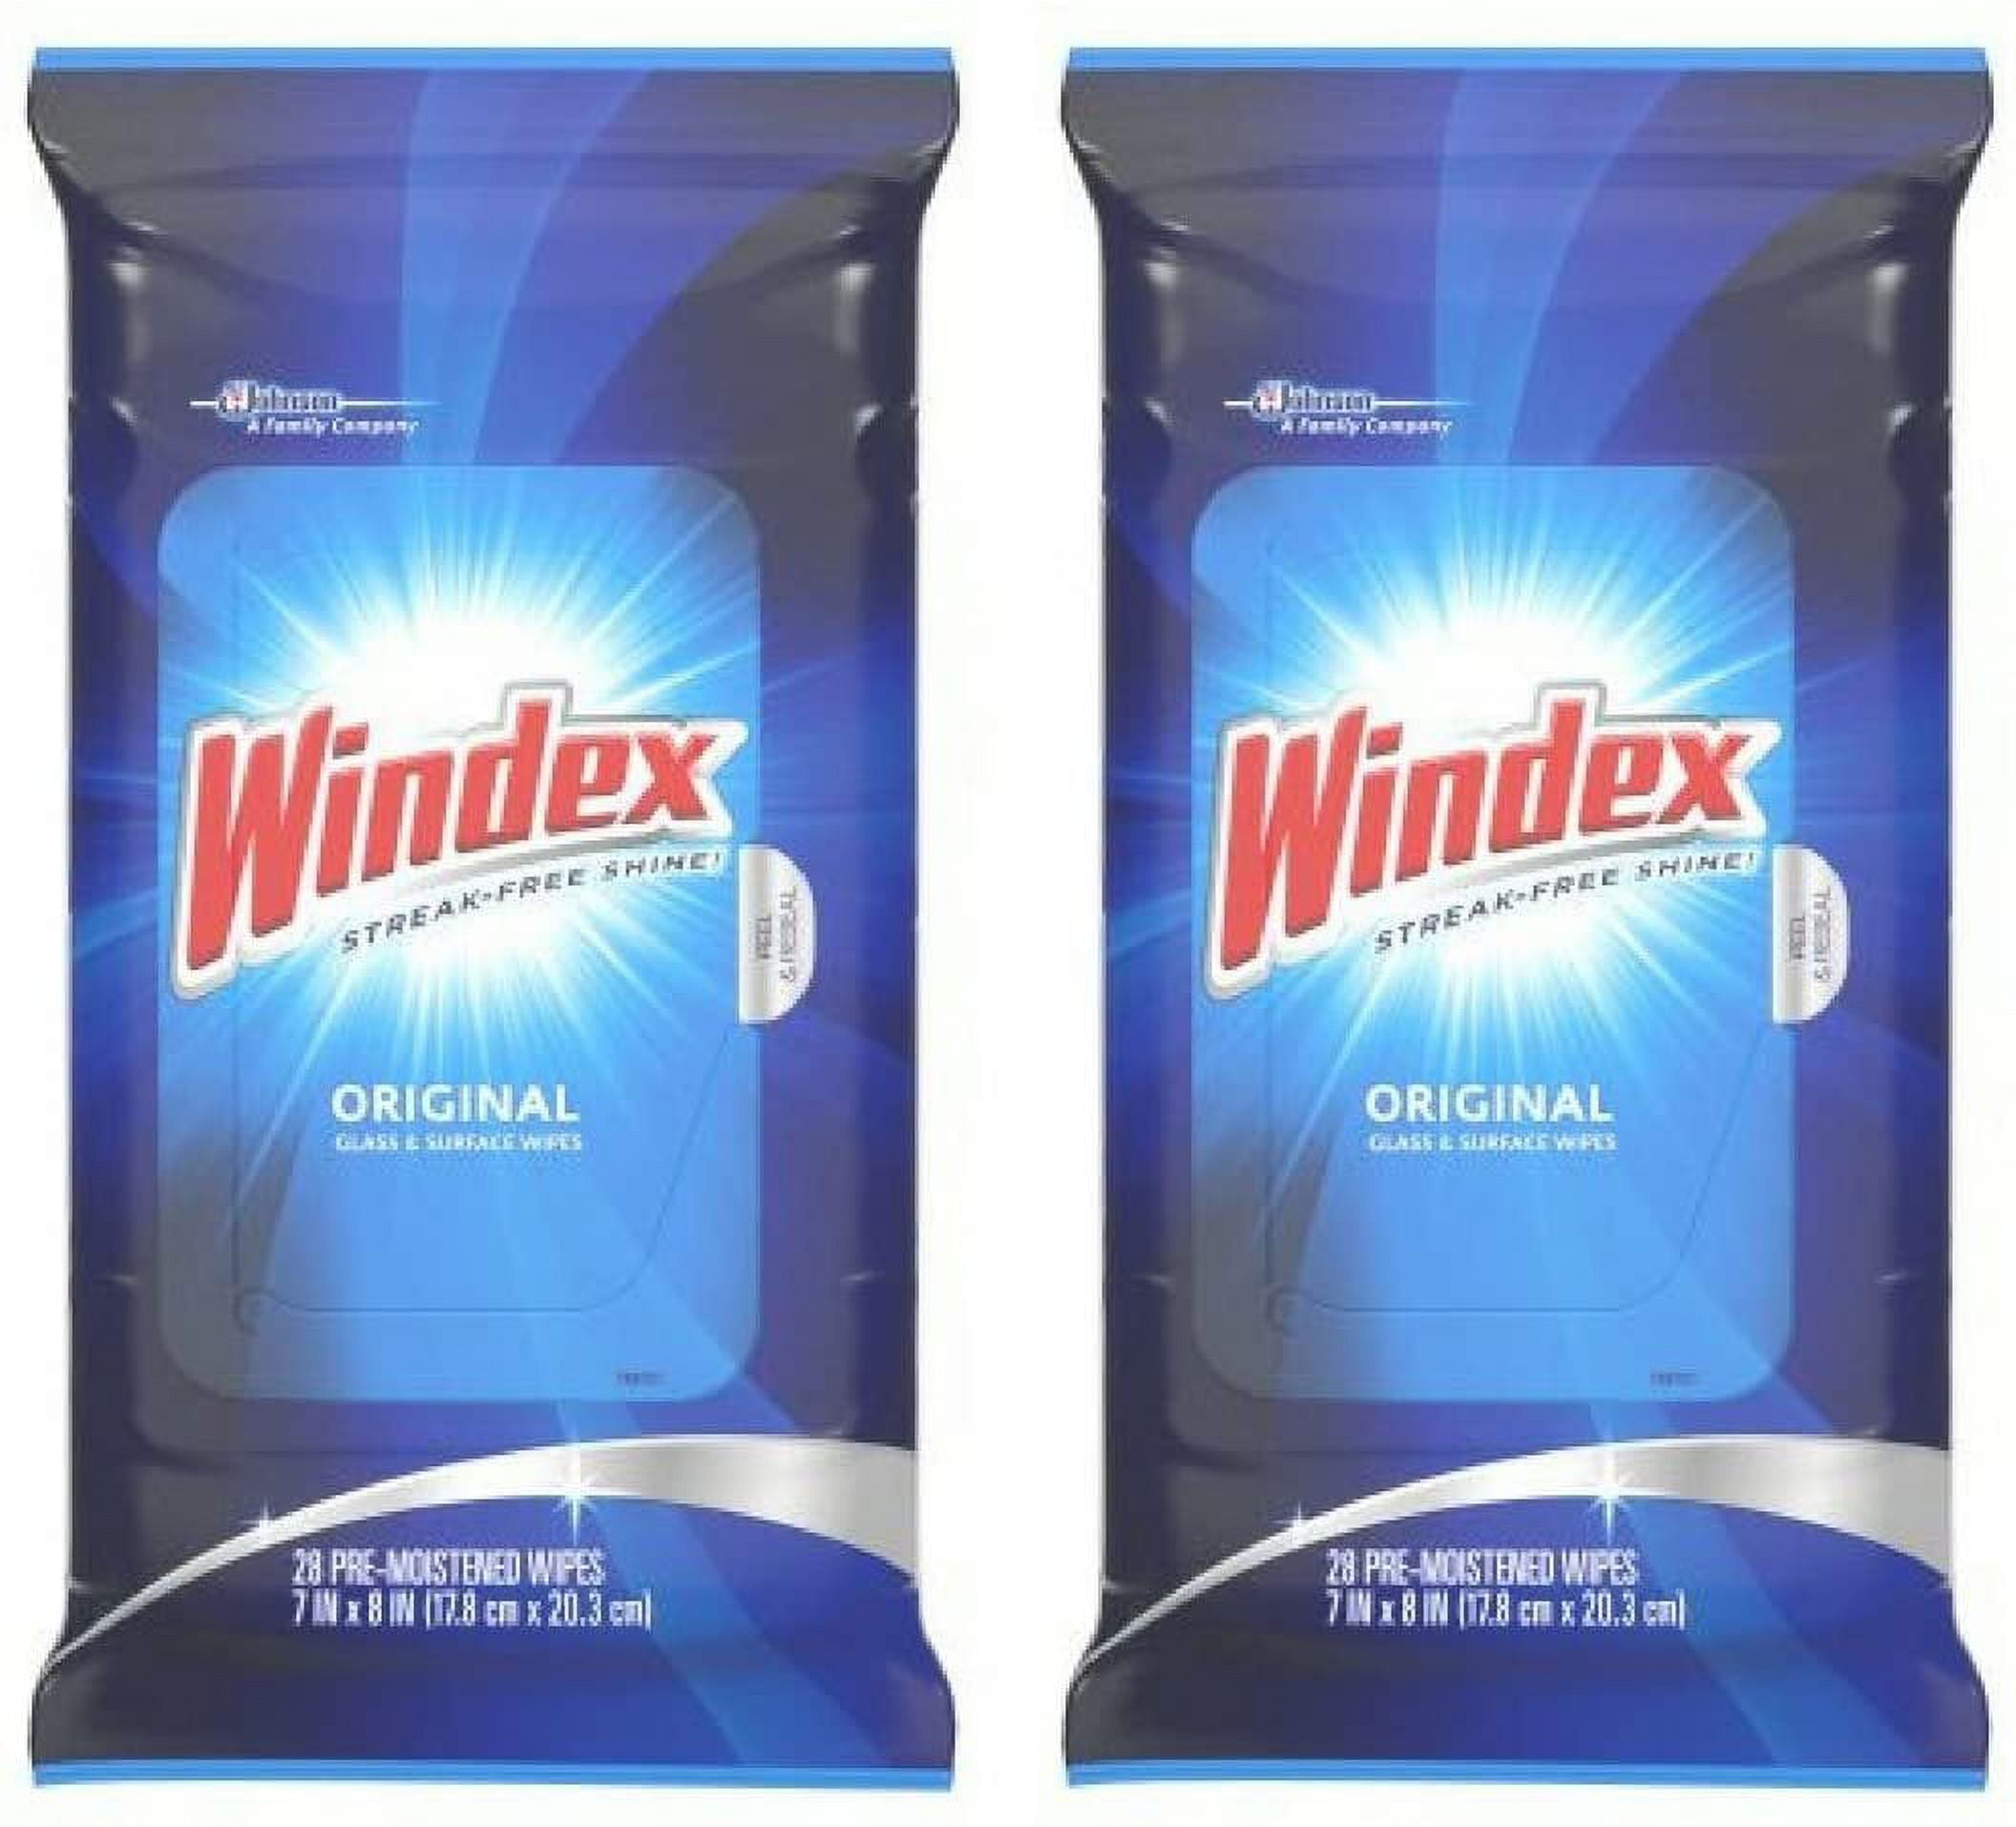 2 Pack-Windex Streak-Free Shine, Original Glass & Surface Wipes, 28 count  each 